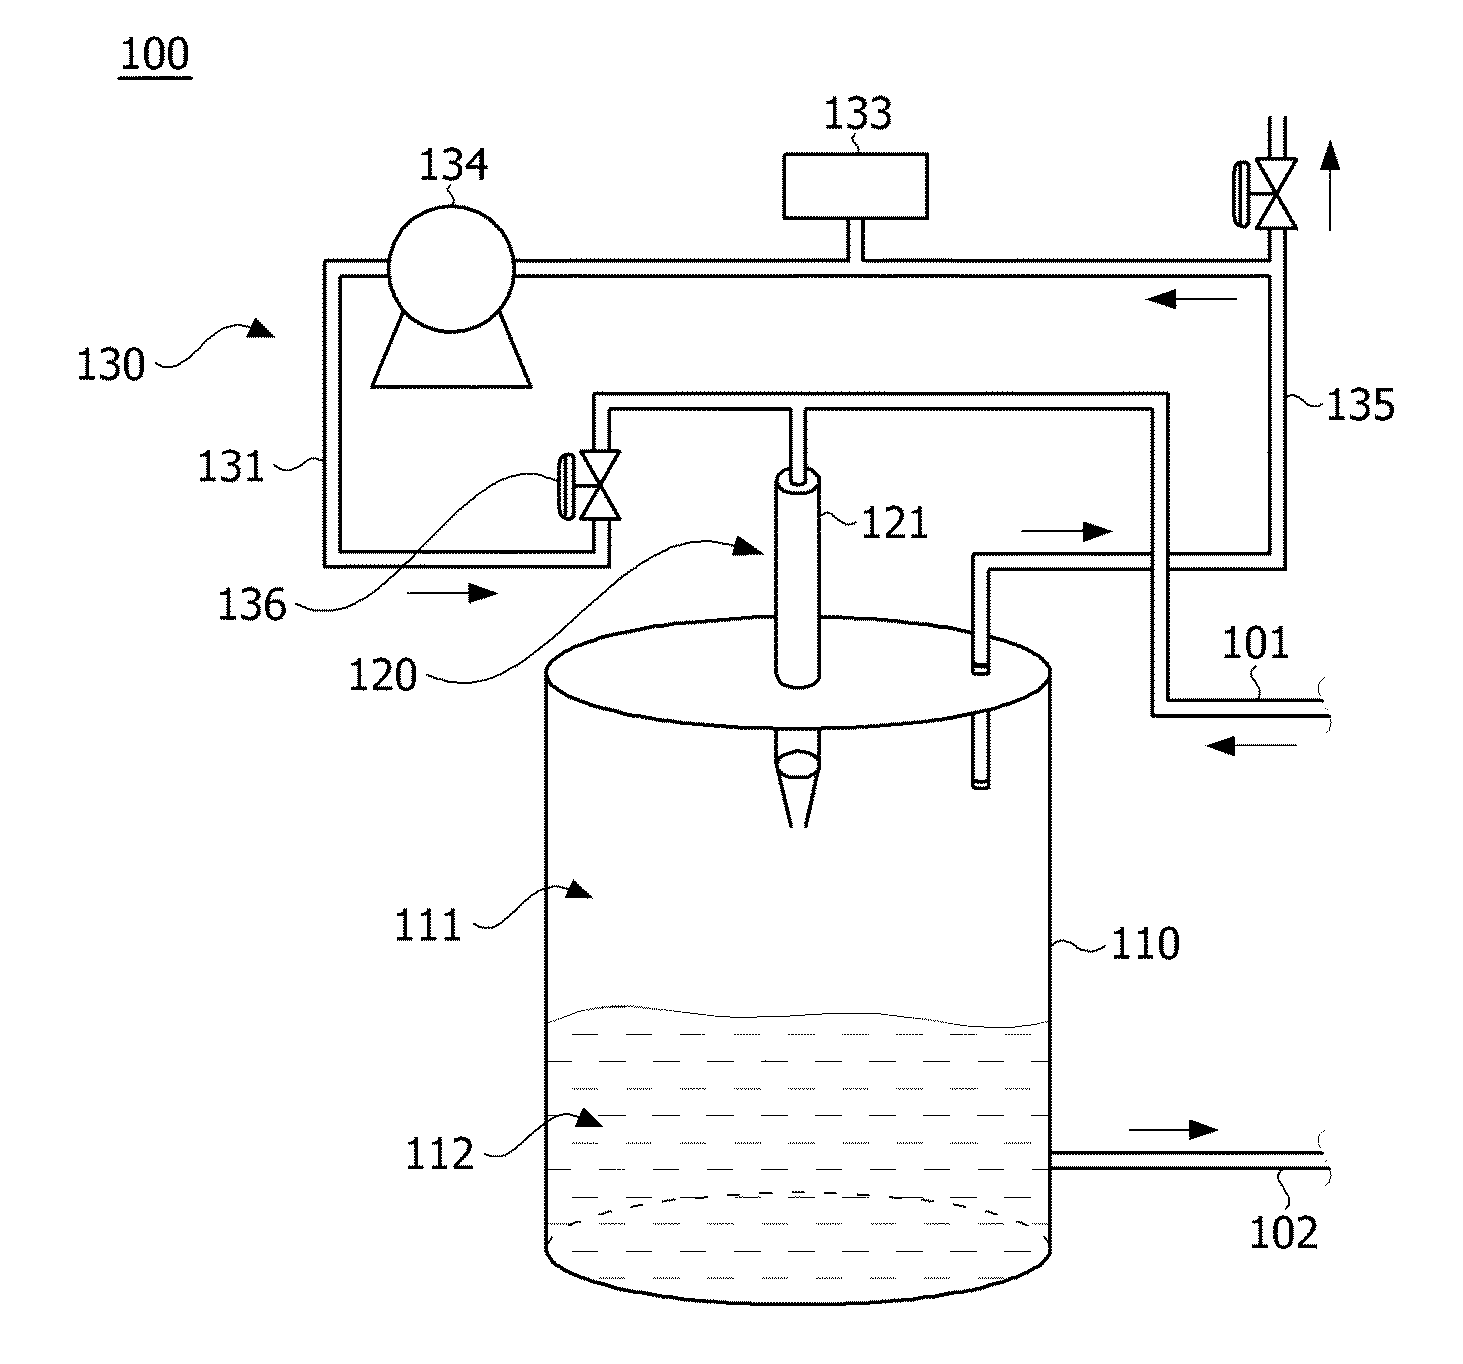 Apparatus and method for treating ballast water